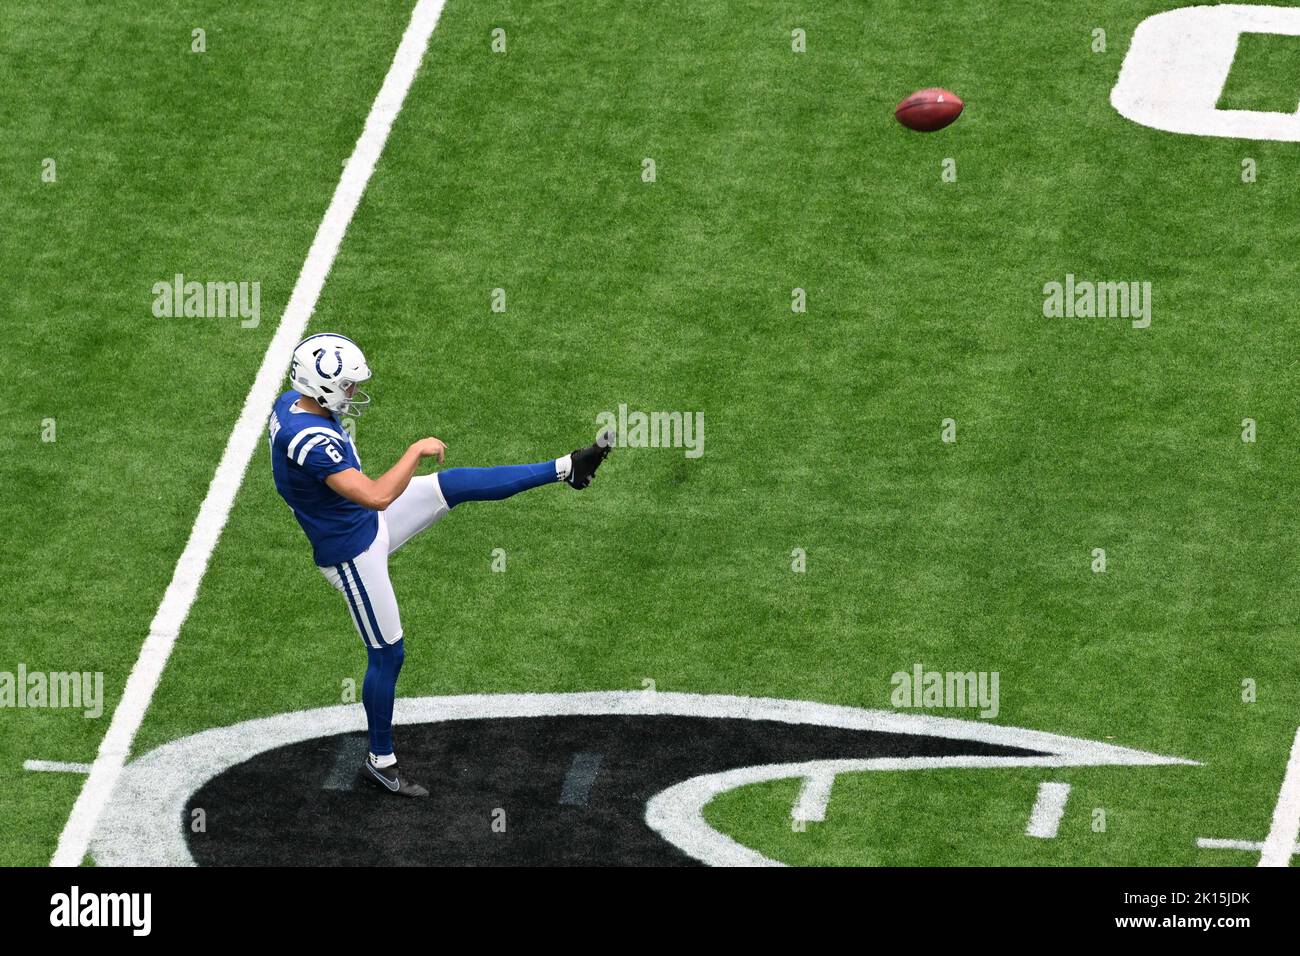 Indianapolis Colts punter Matt Haack (6) punts in the second quarter of the NFL football game between the Indianapolis Colts and the Houston Texans on Stock Photo